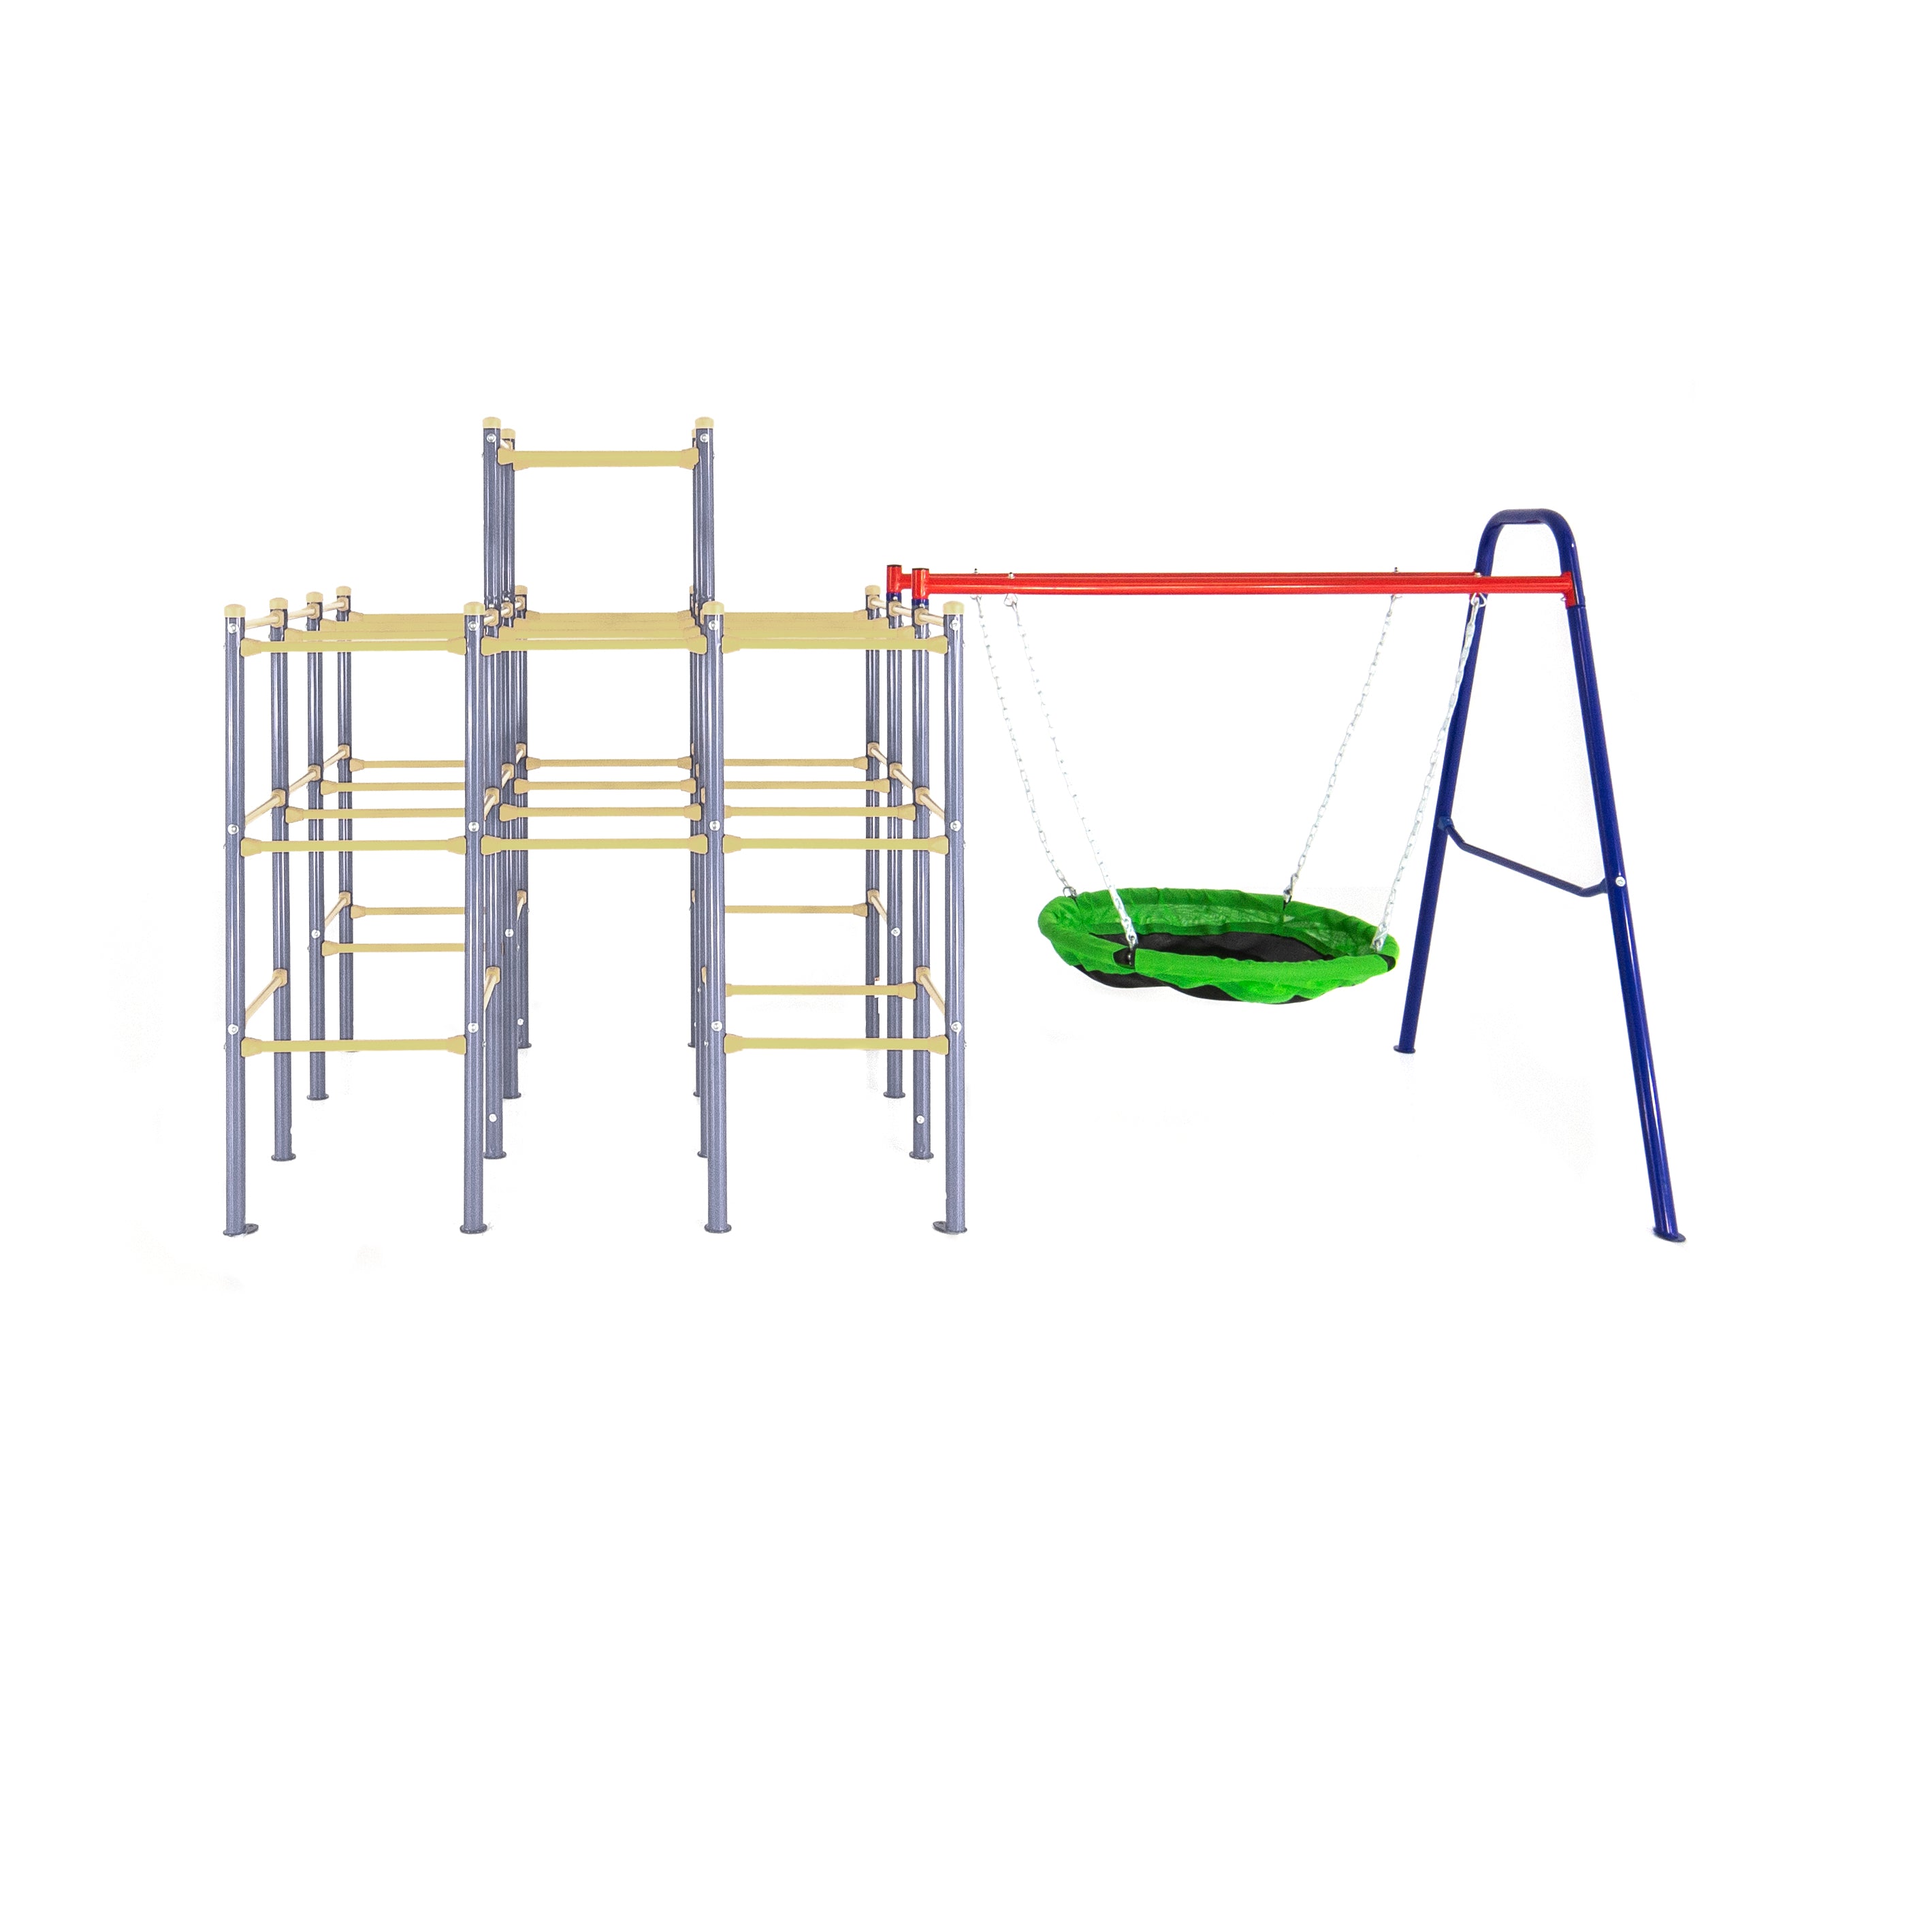 The Saucer Swing Accessory Module is connected to the Modular Jungle Gym Base.